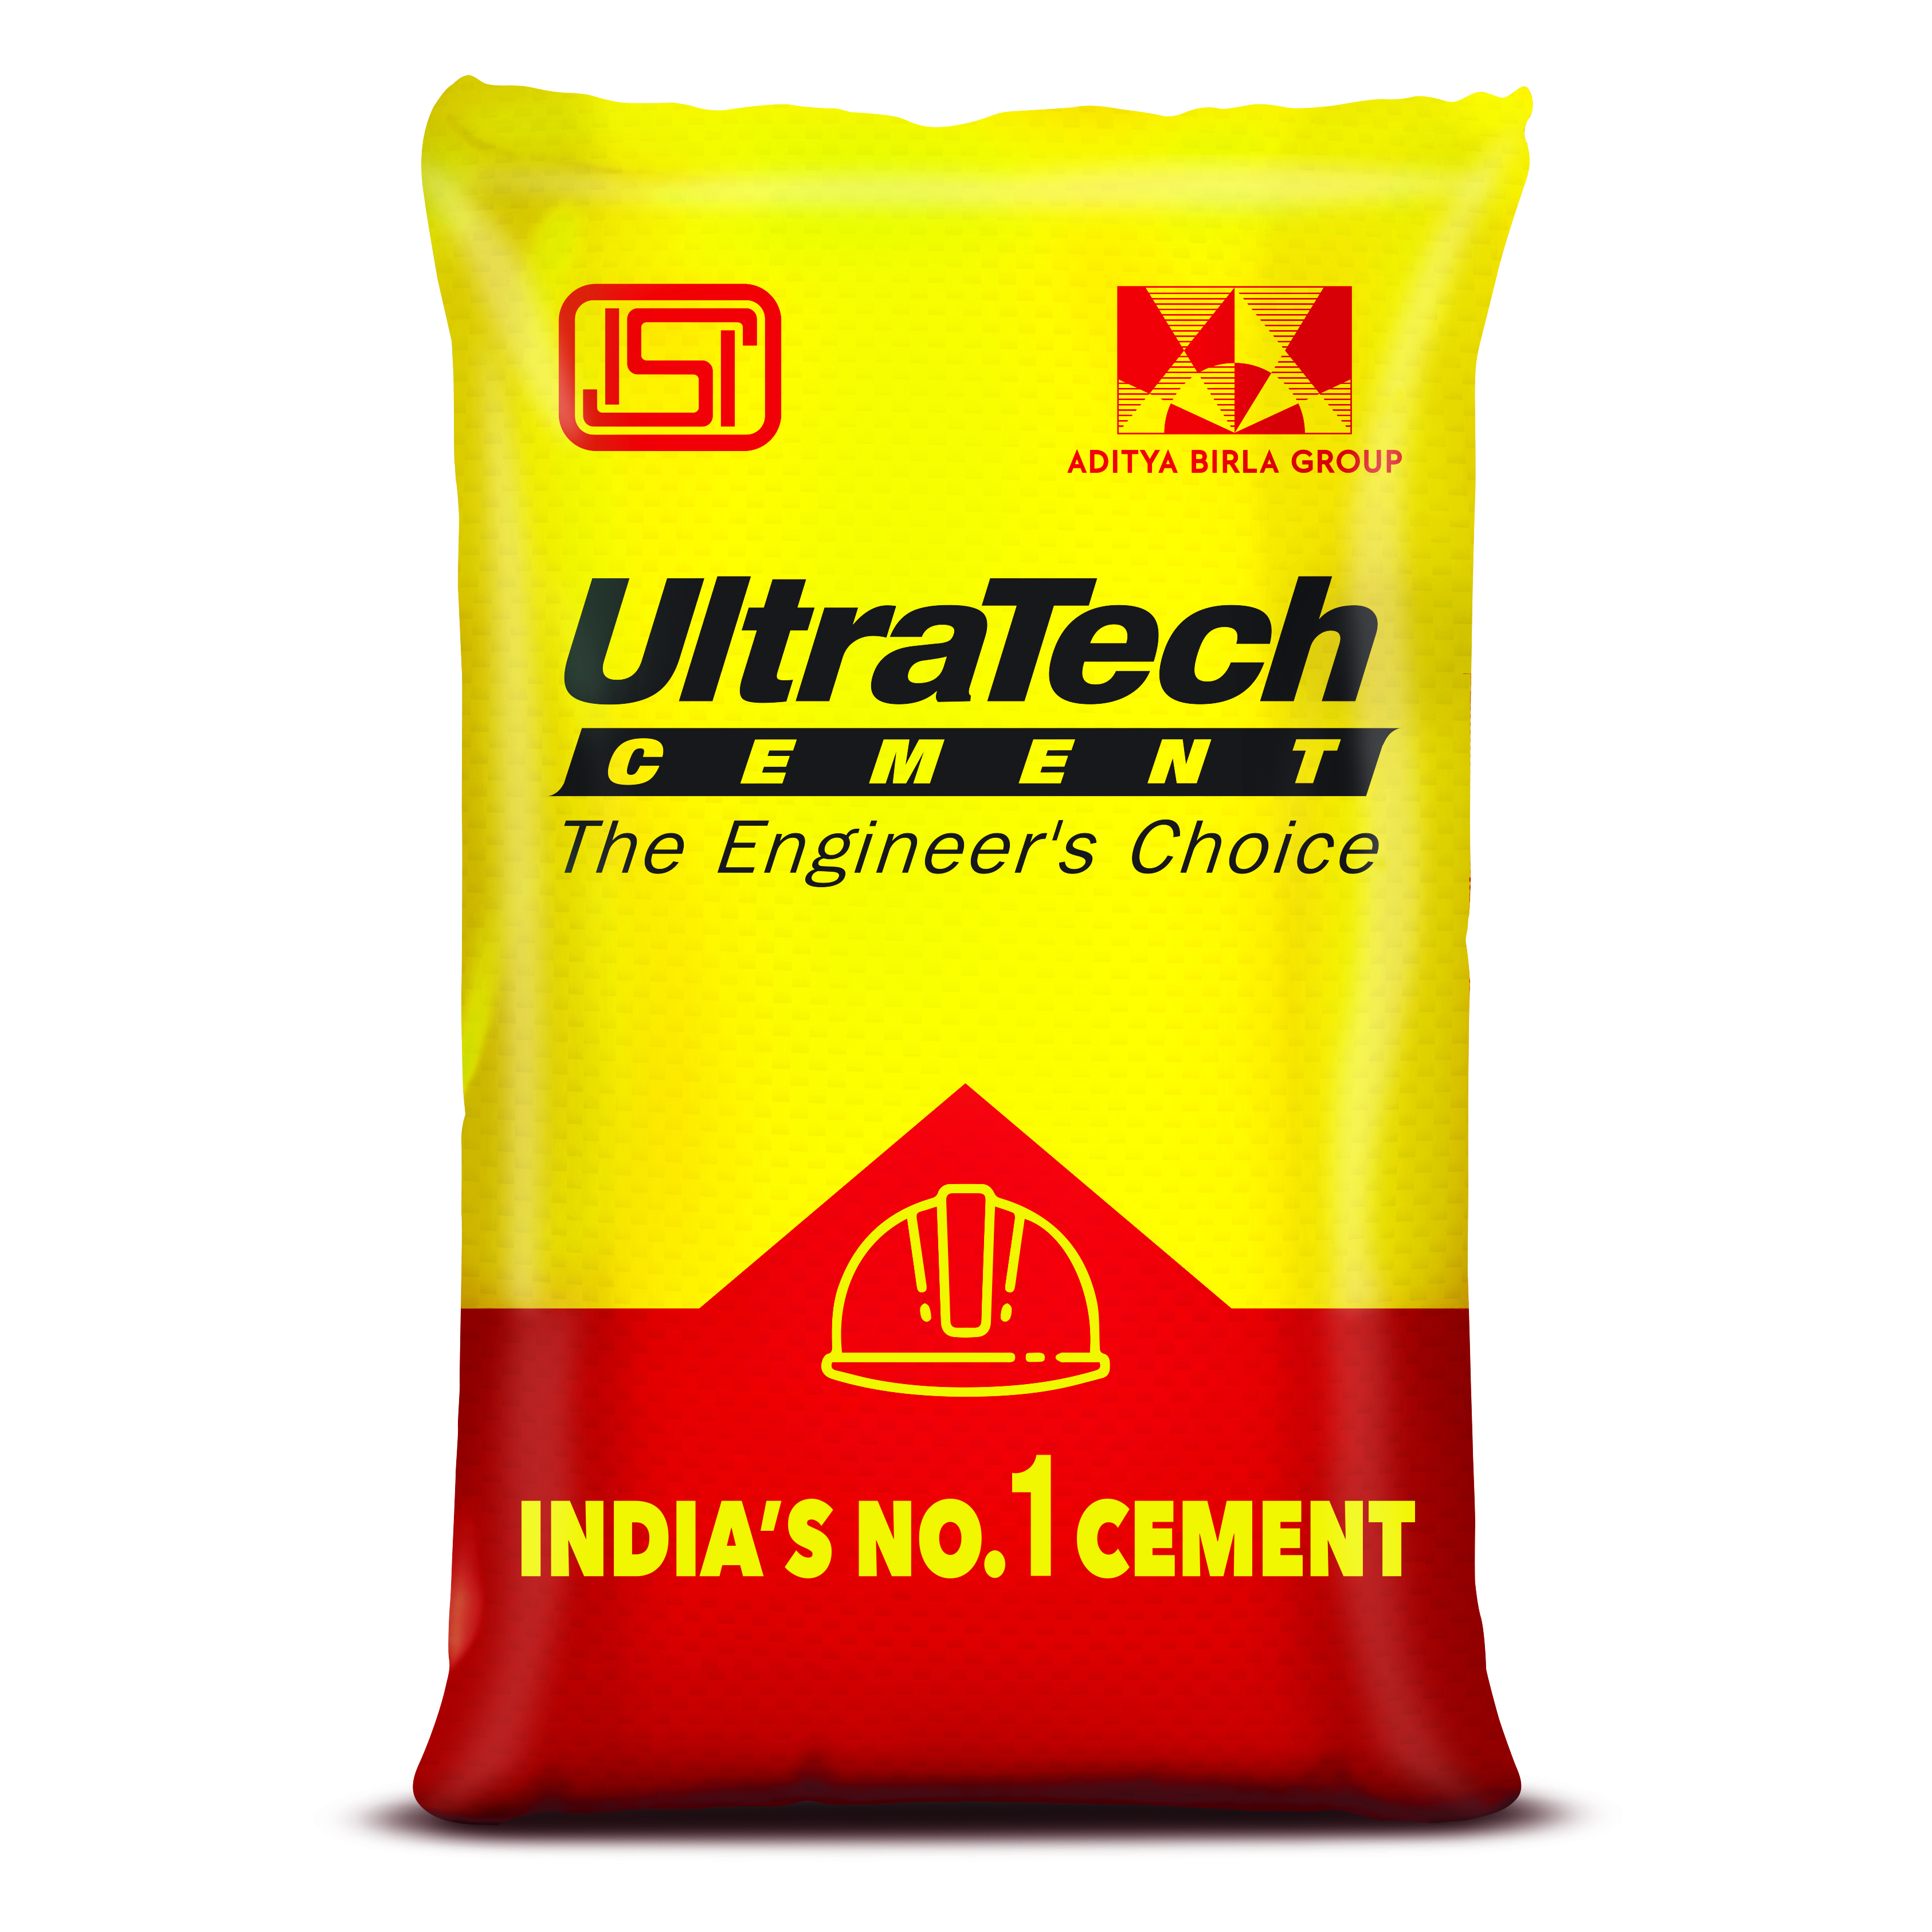 UltraTech Cement Q4 Results FY2023, Net Profit at Rs. 1666 crores | UltraTech  Cement, Quarterly updates | 5paisa